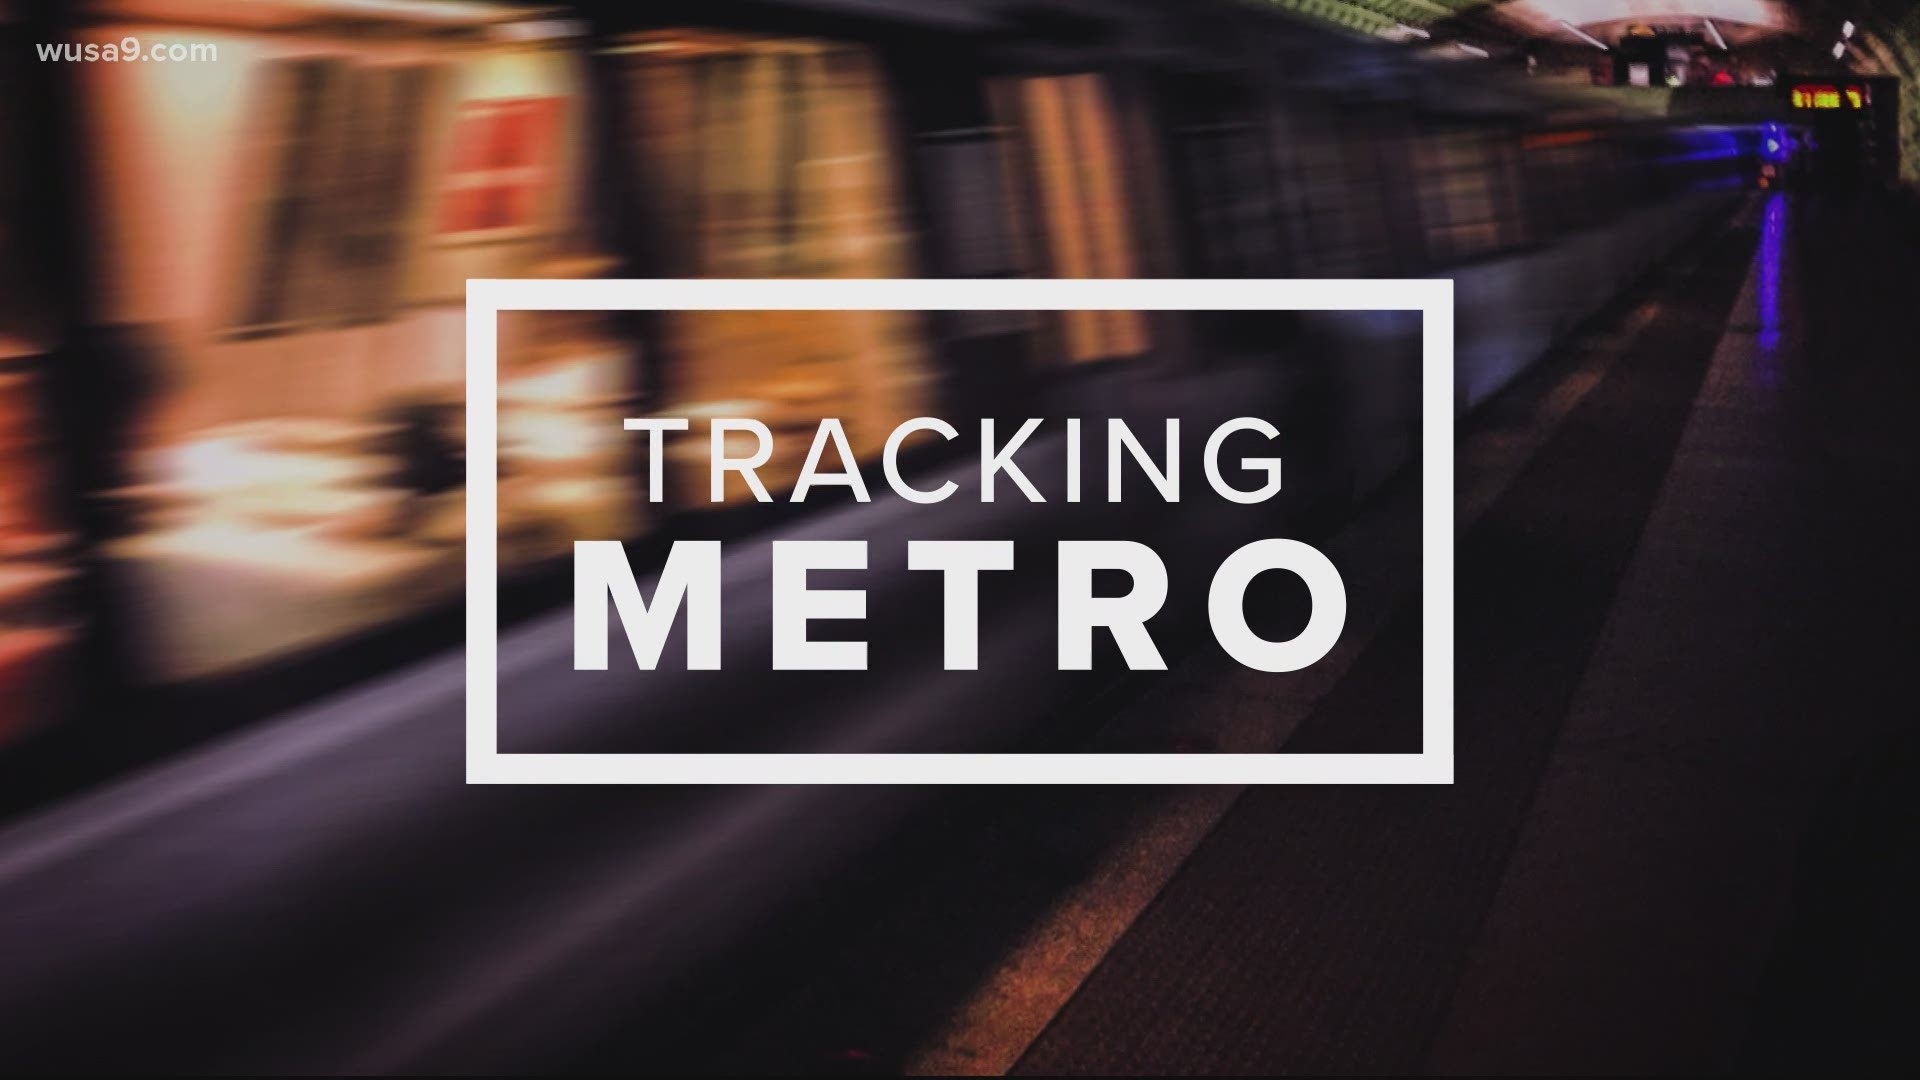 The Metro safety probe came after an uncoupling of Red Line trains on Oct. 9.